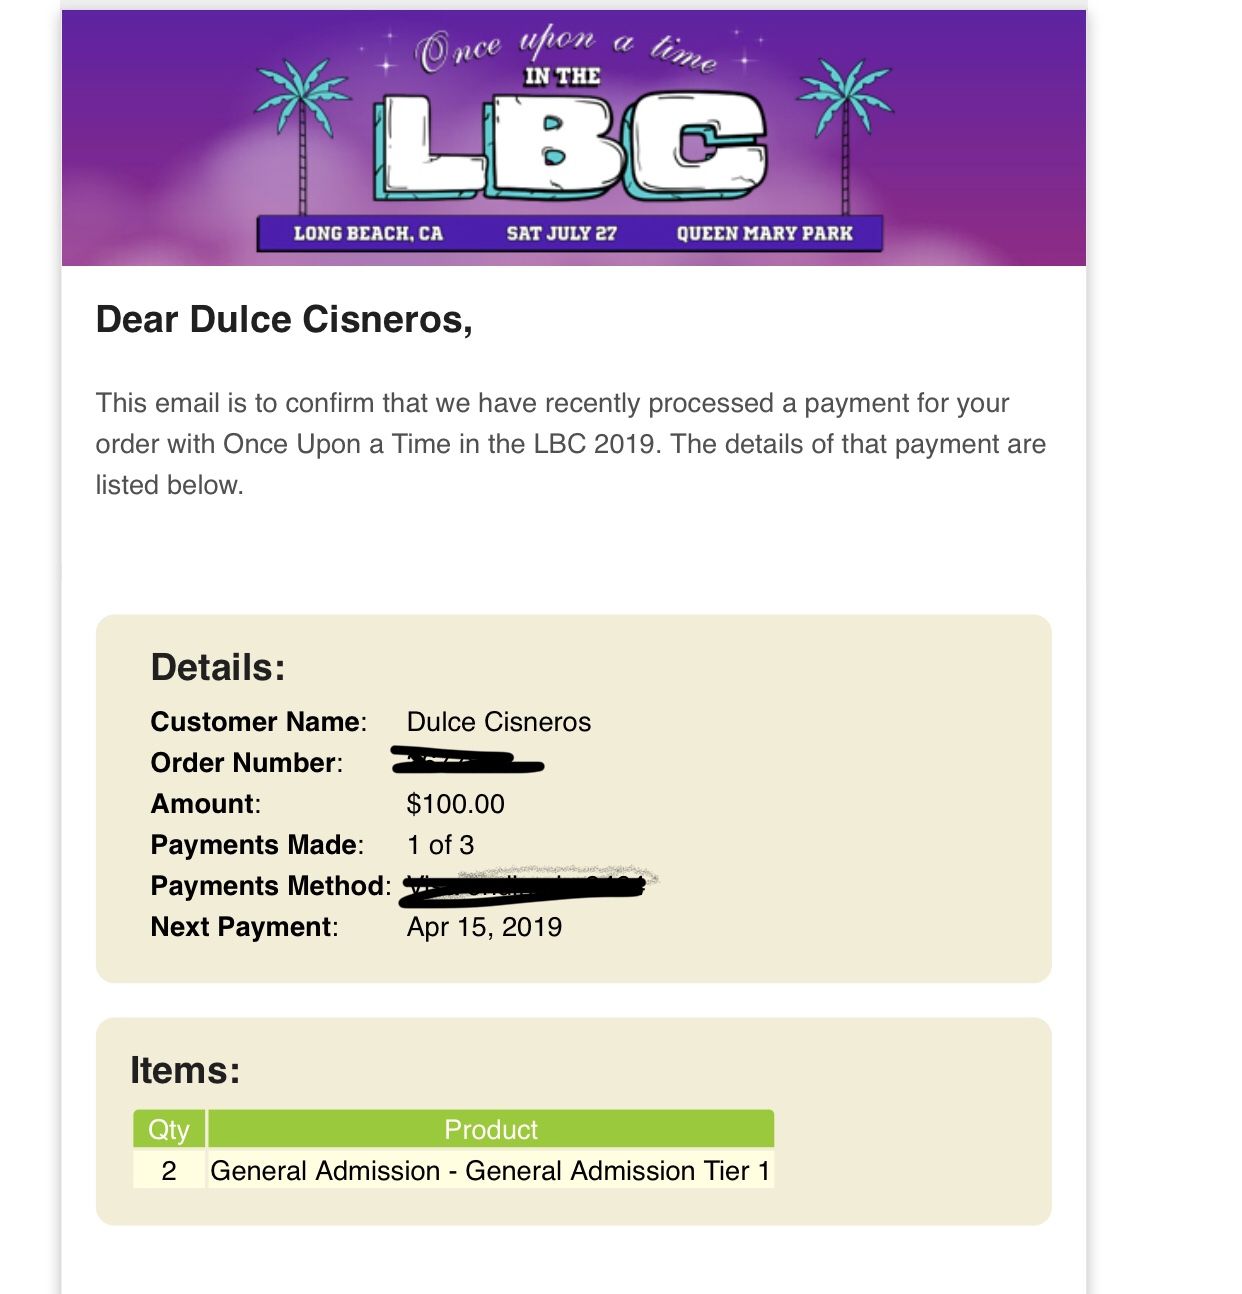 2 GA tickets to Once upon a time in the LBC